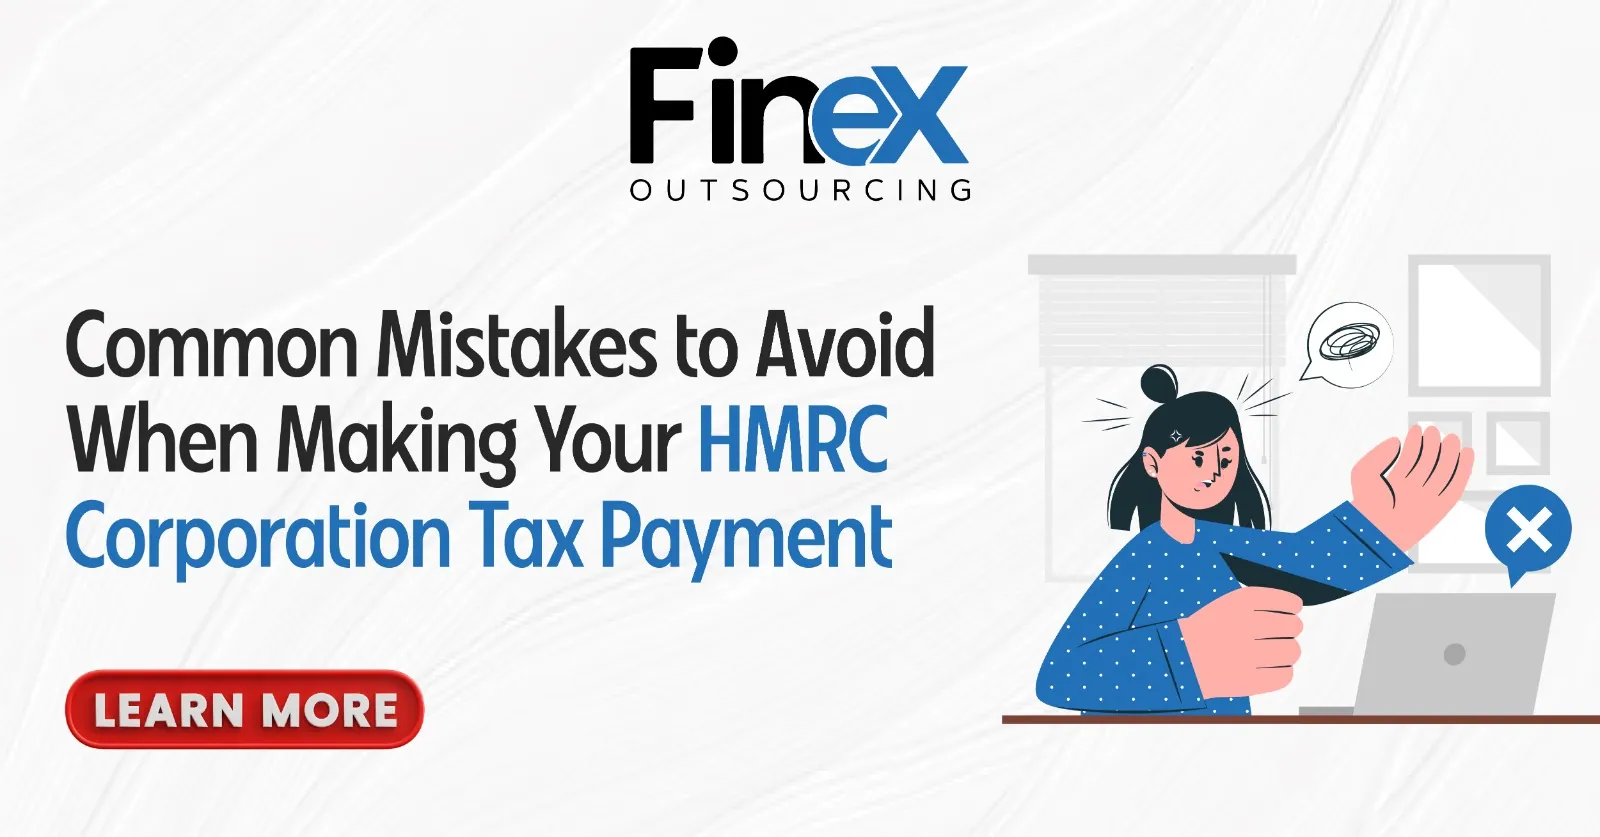 Common Mistakes to Avoid When Making Your HMRC Corporation Tax Payment